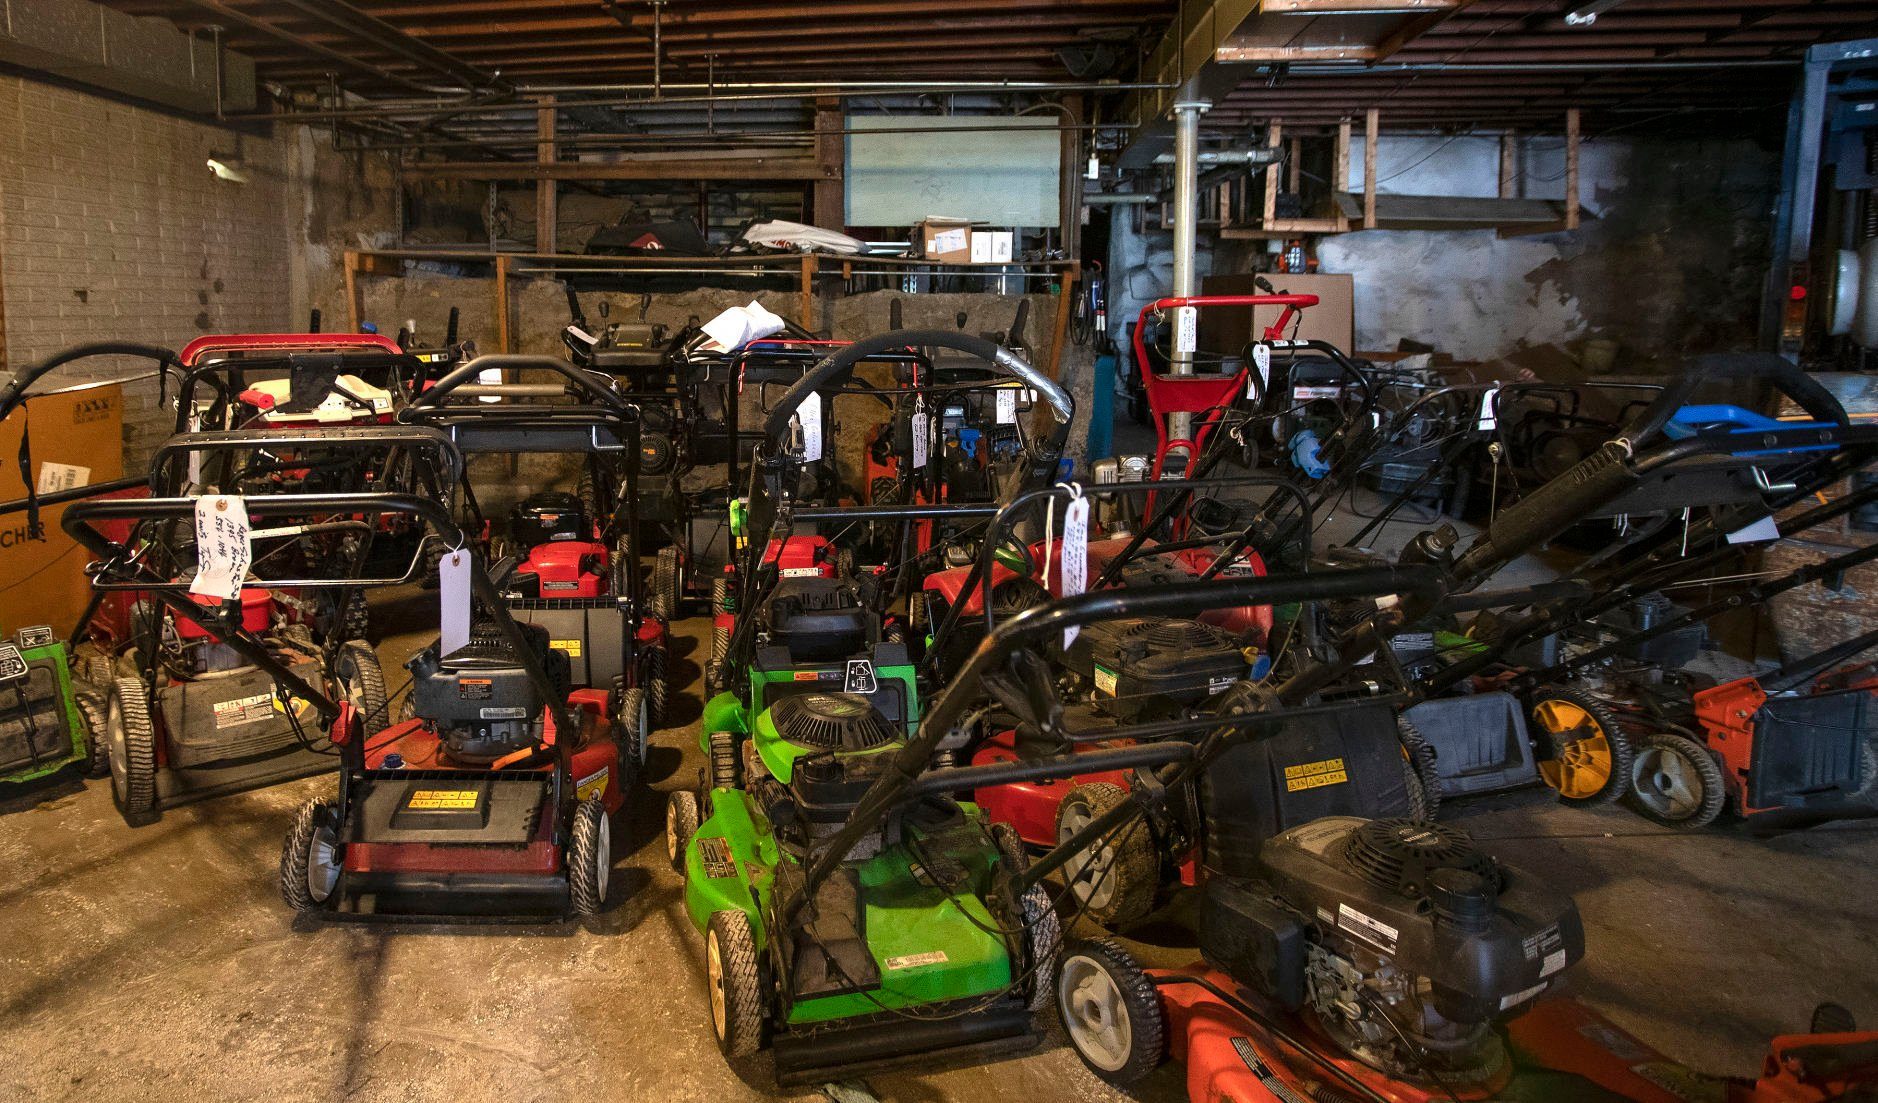 Mowers lined up in the repair shop at McGovern Hardware in Dubuque on Thursday, May 12, 2022.    PHOTO CREDIT: Stephen Gassman